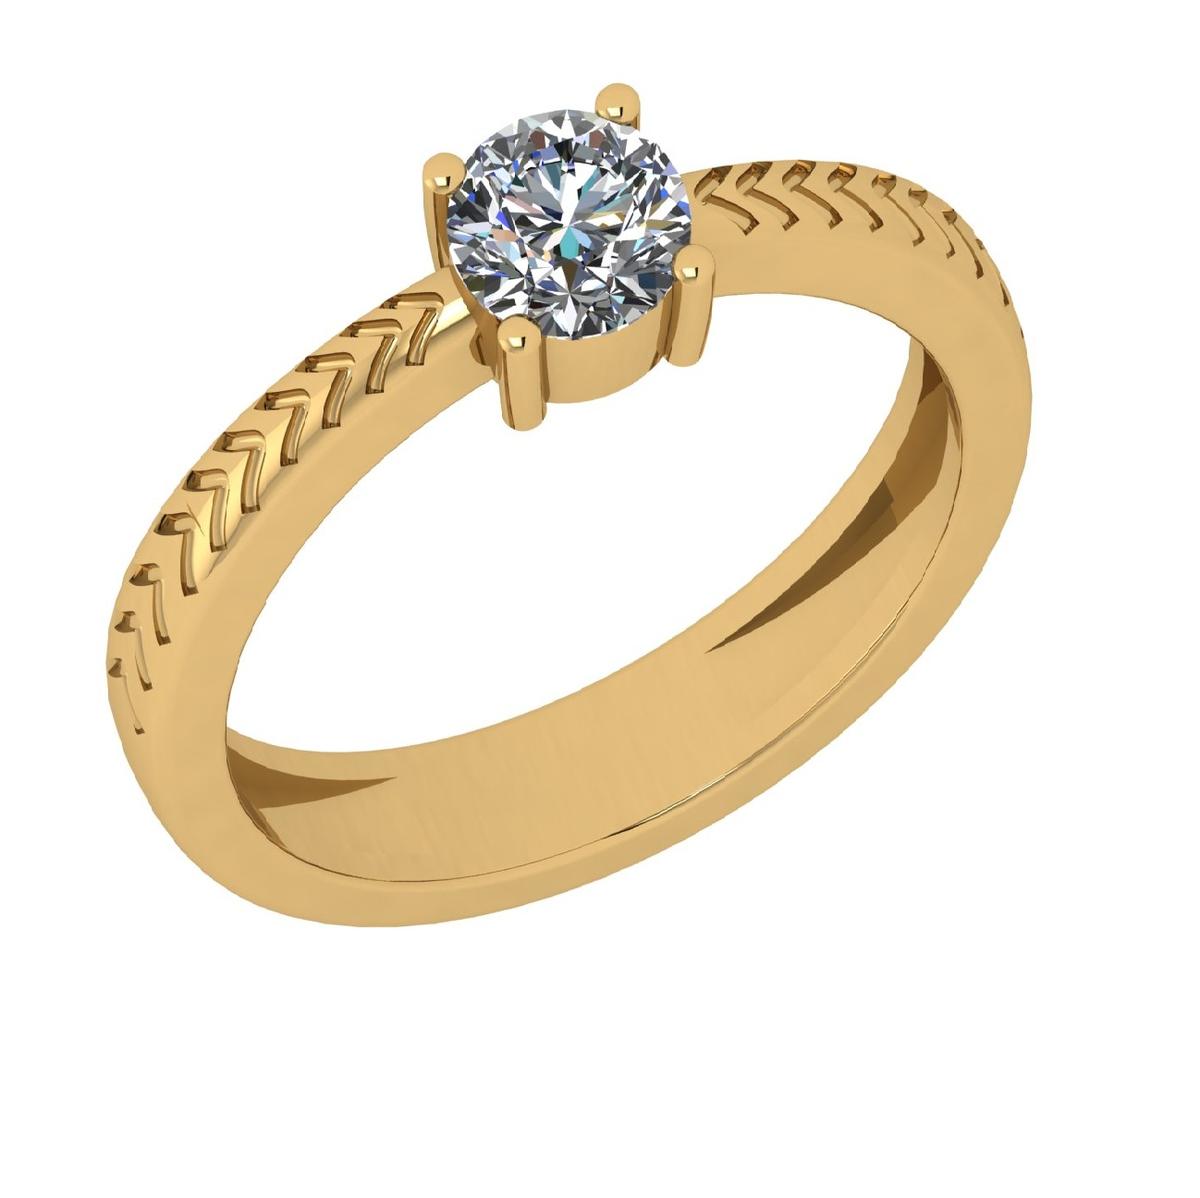 CERTIFIED 2.02 CTW D/SI1 ROUND (LAB GROWN Certified DIAMOND SOLITAIRE RING ) IN 14K YELLOW GOLD